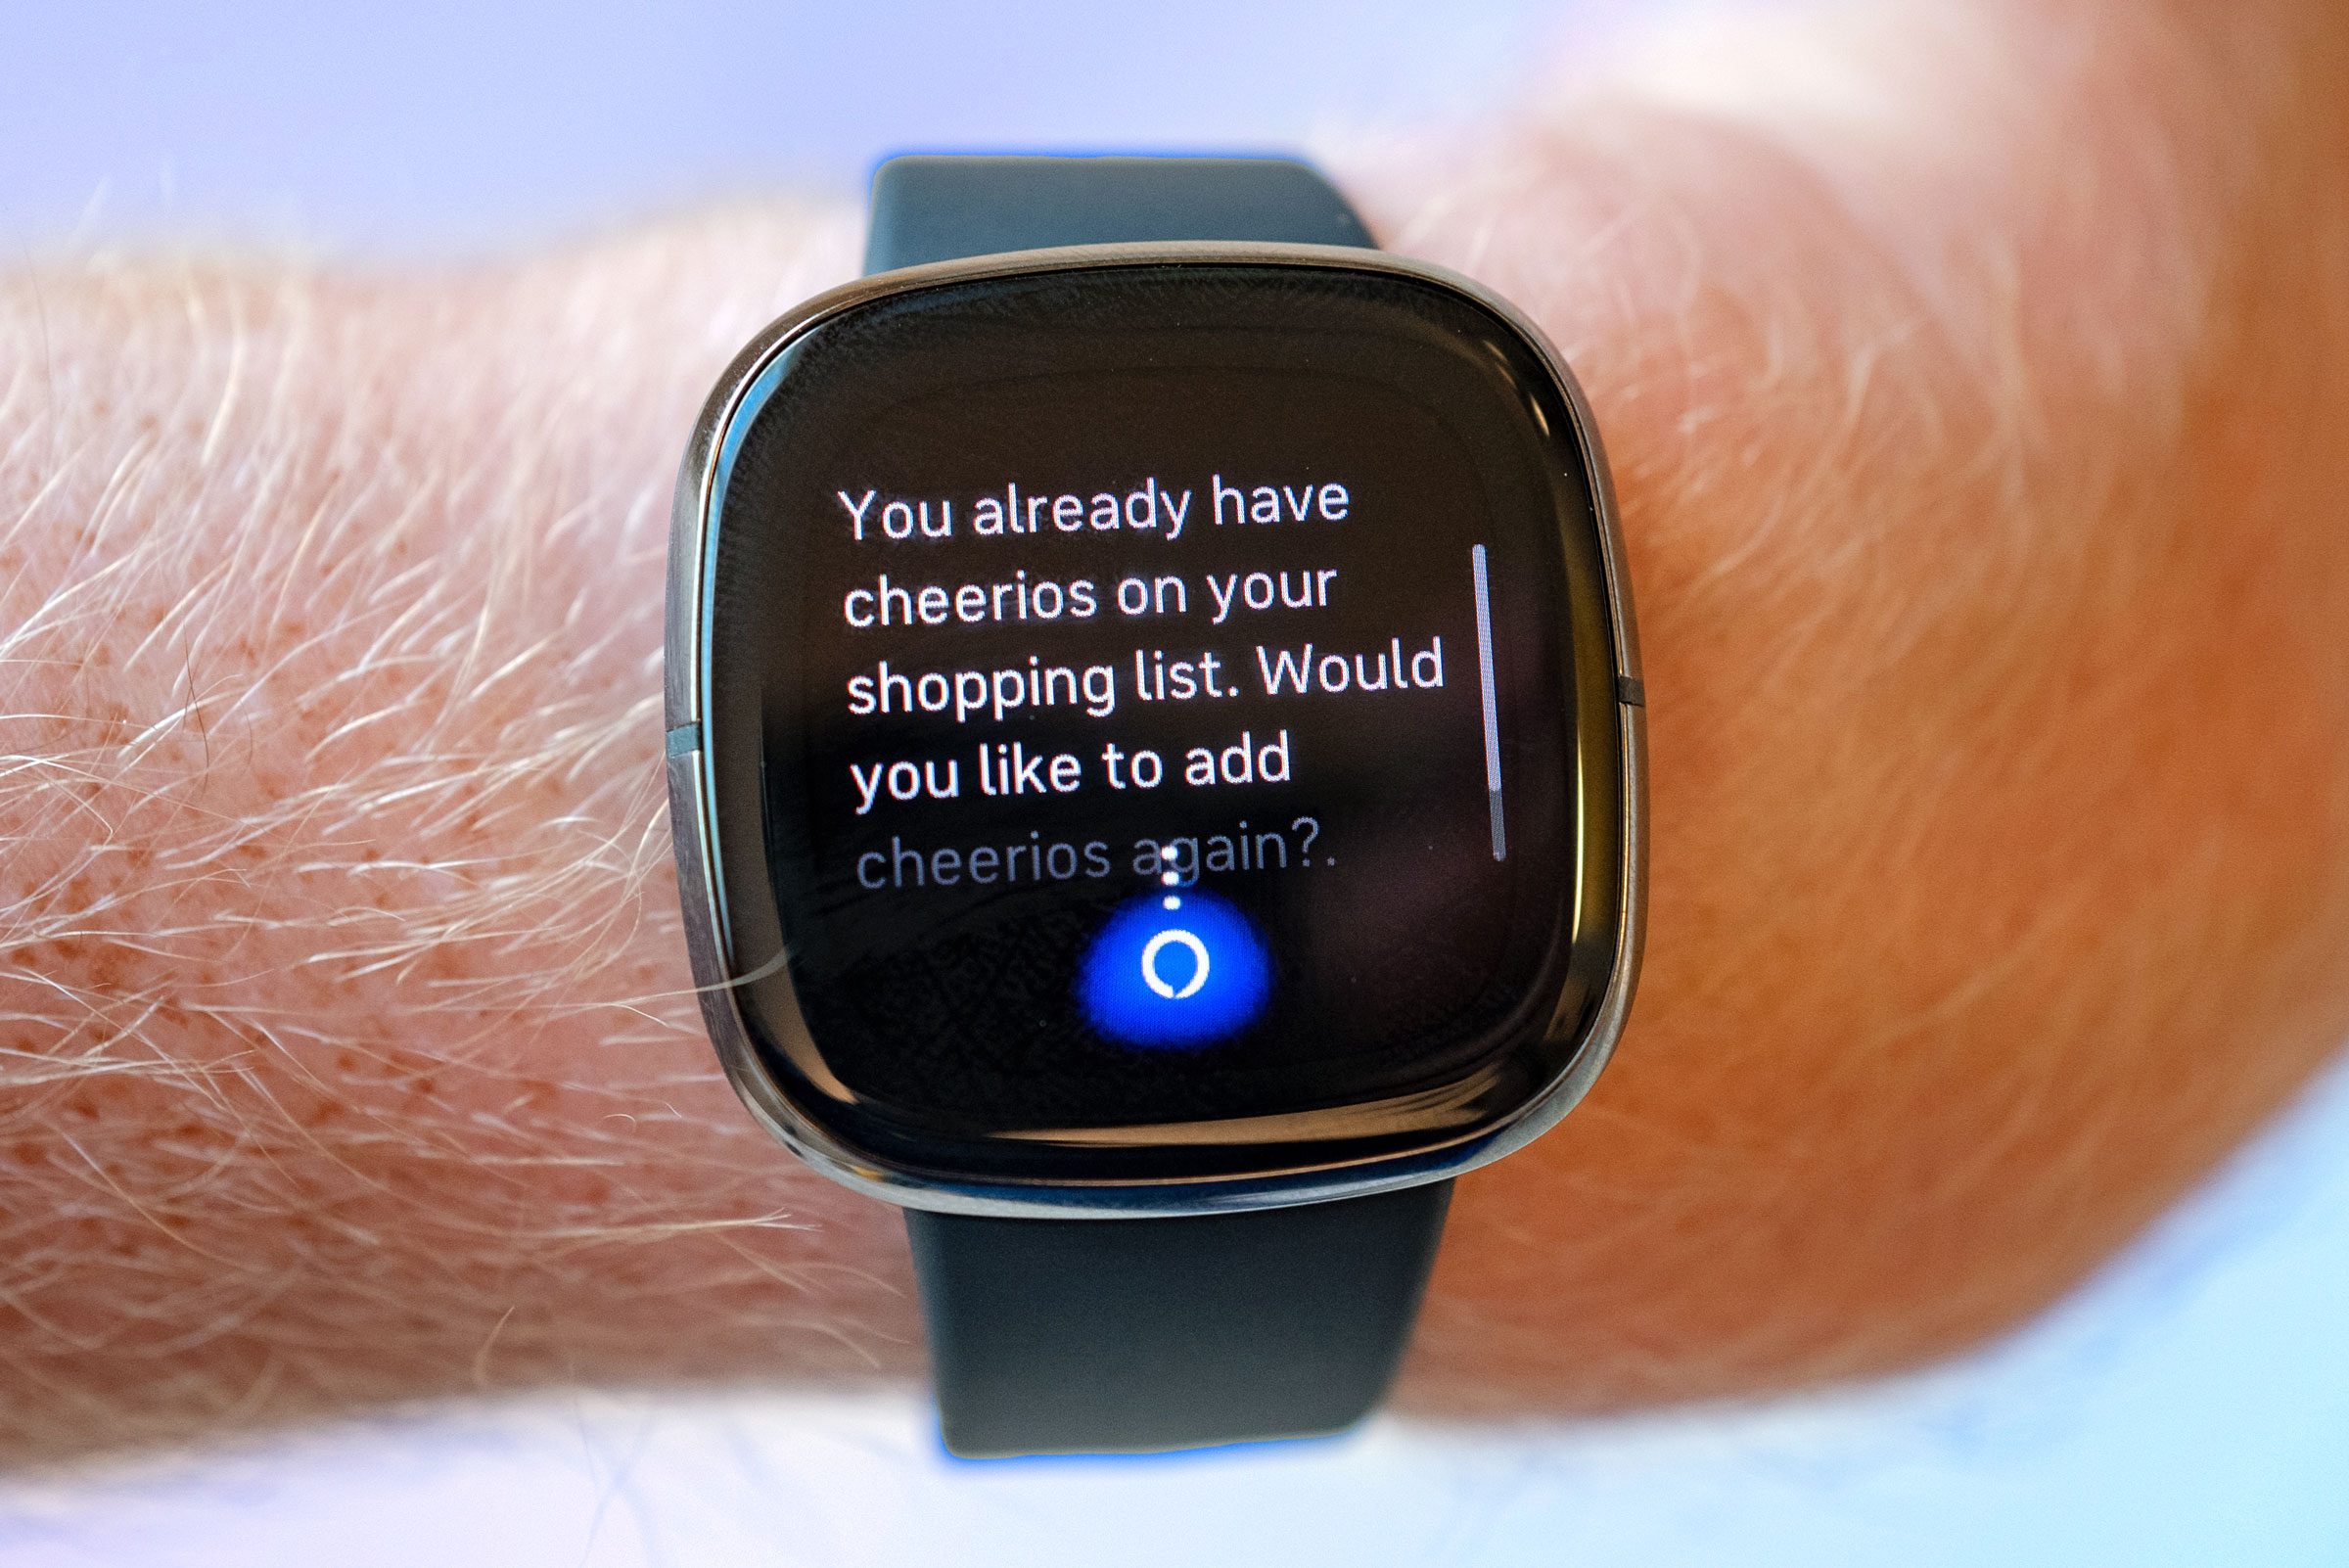 Man wearing a smart watch talking to Alexa about adding Cheerios to a shopping list